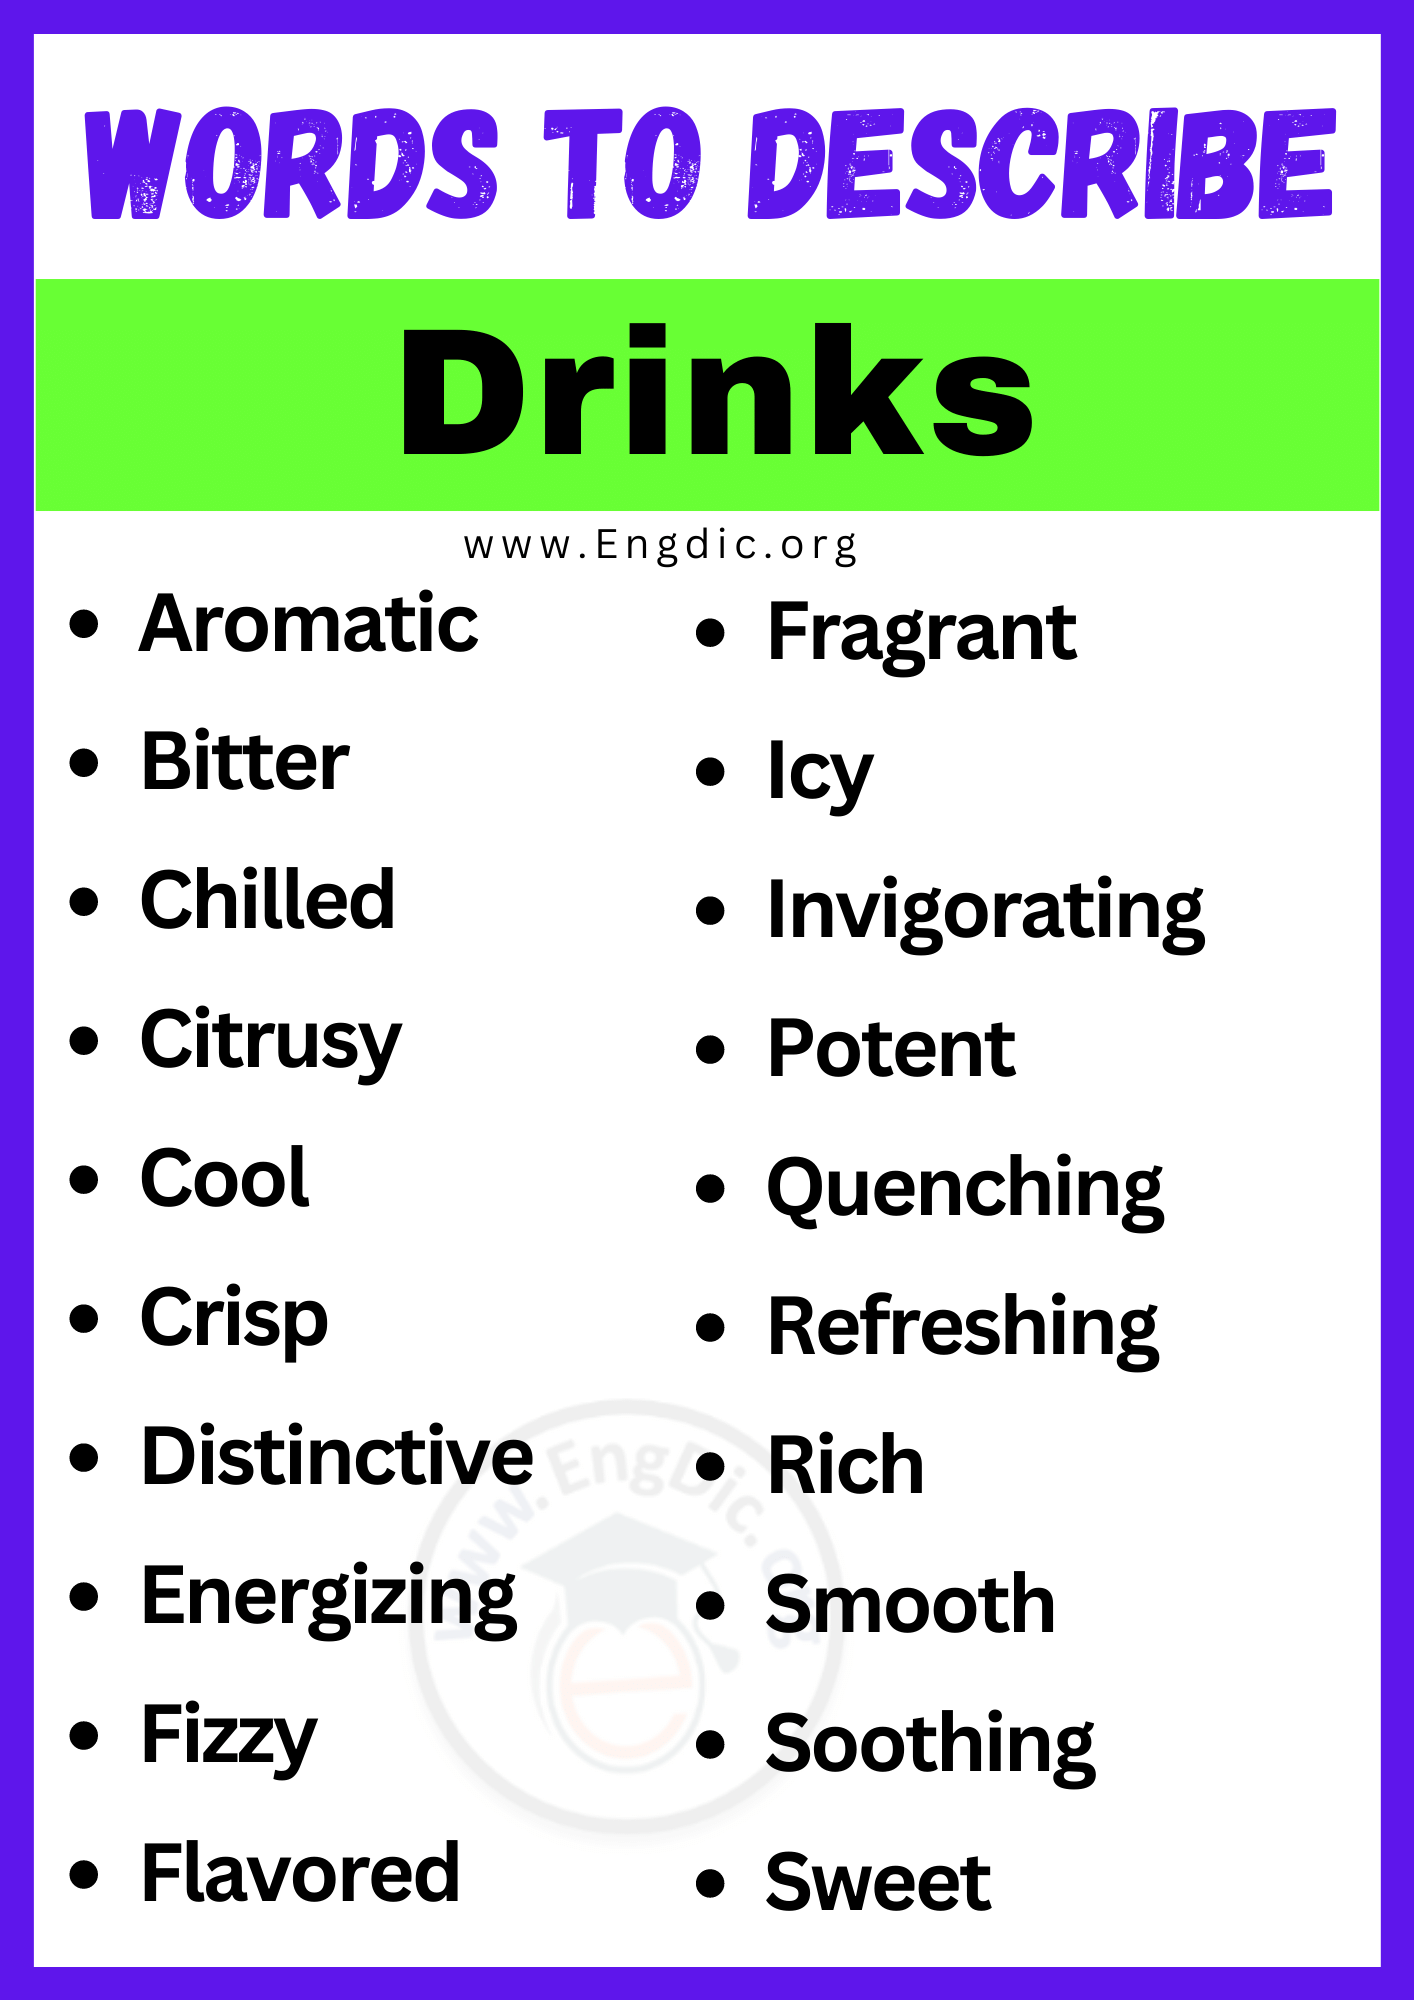 Words to Describe Drinks